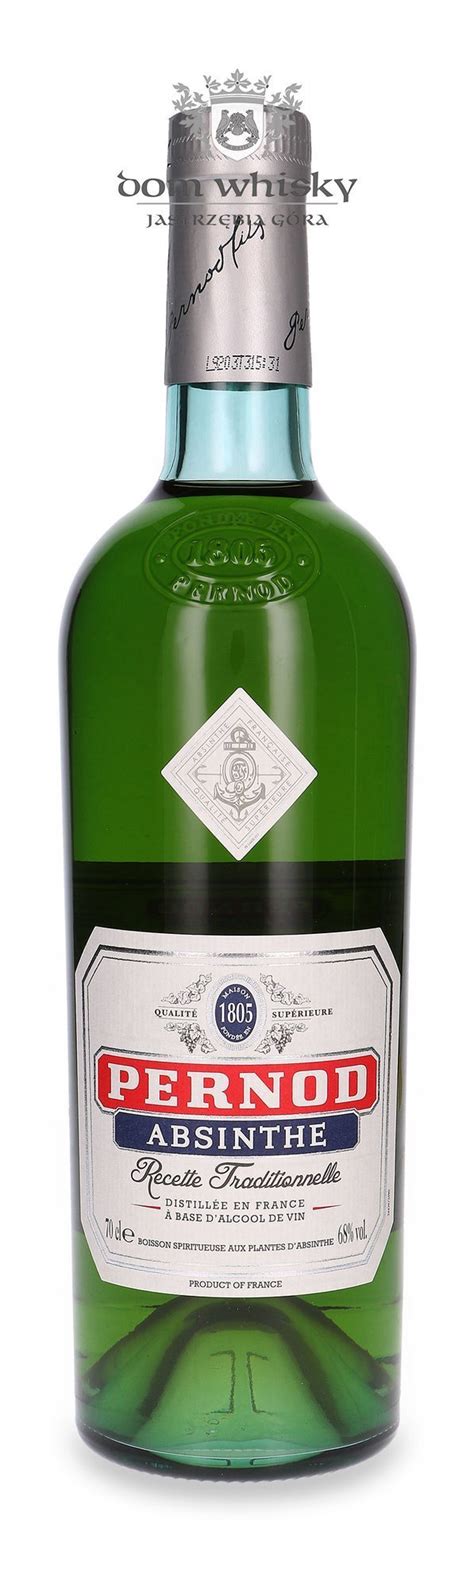 Pernod absinthe. Pernod Pernod Absinthe – France “Pernod is perhaps one of the oldest distillation houses making attempts to recreate a recipe from a bygone era. When reintroduced after the ban was lifted, the ... 